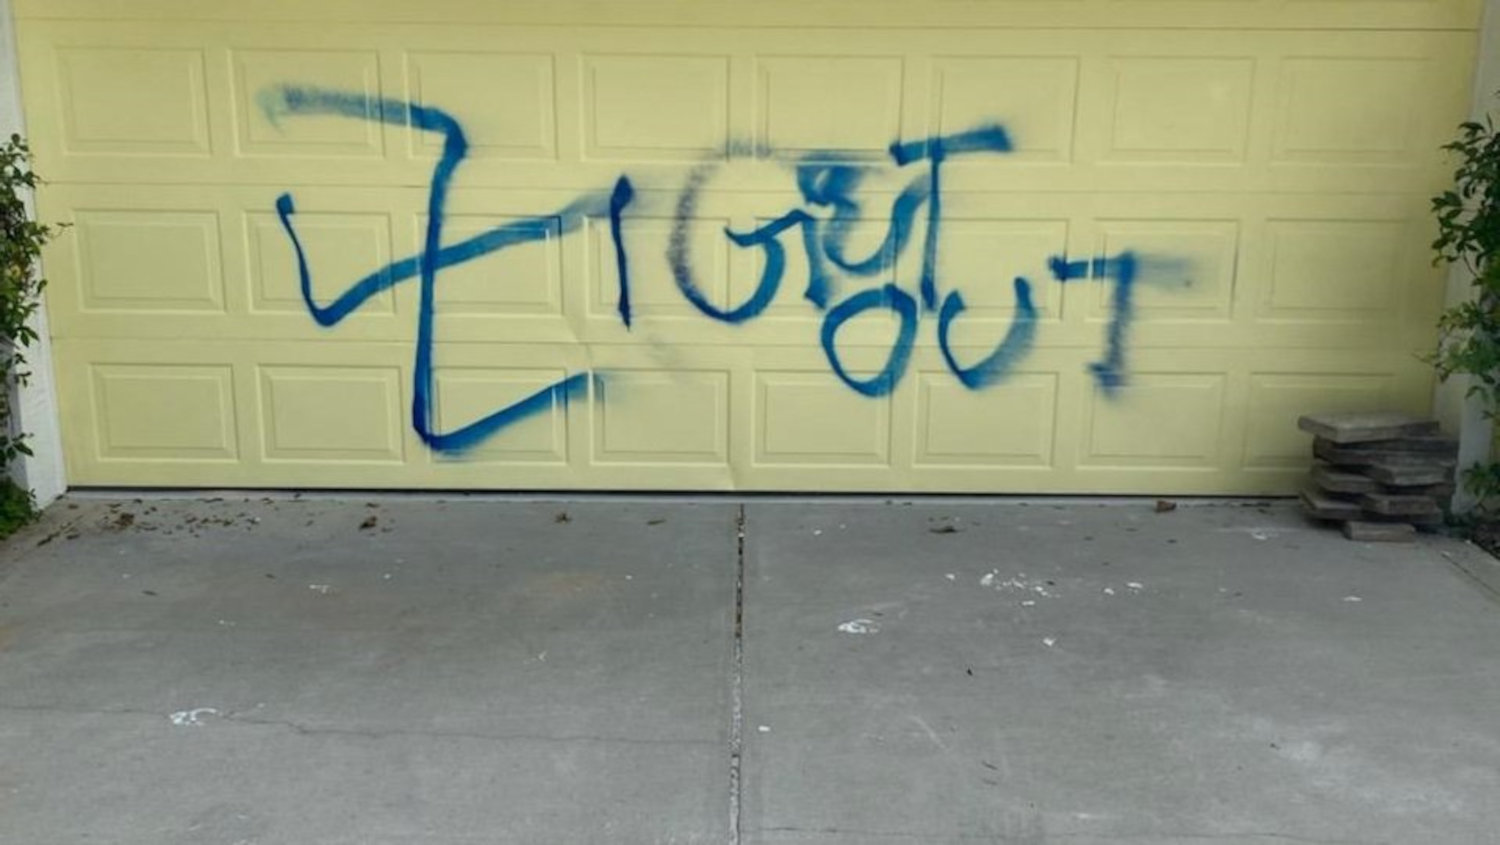 The graffiti left on the garage door of a John Anderson Drive home